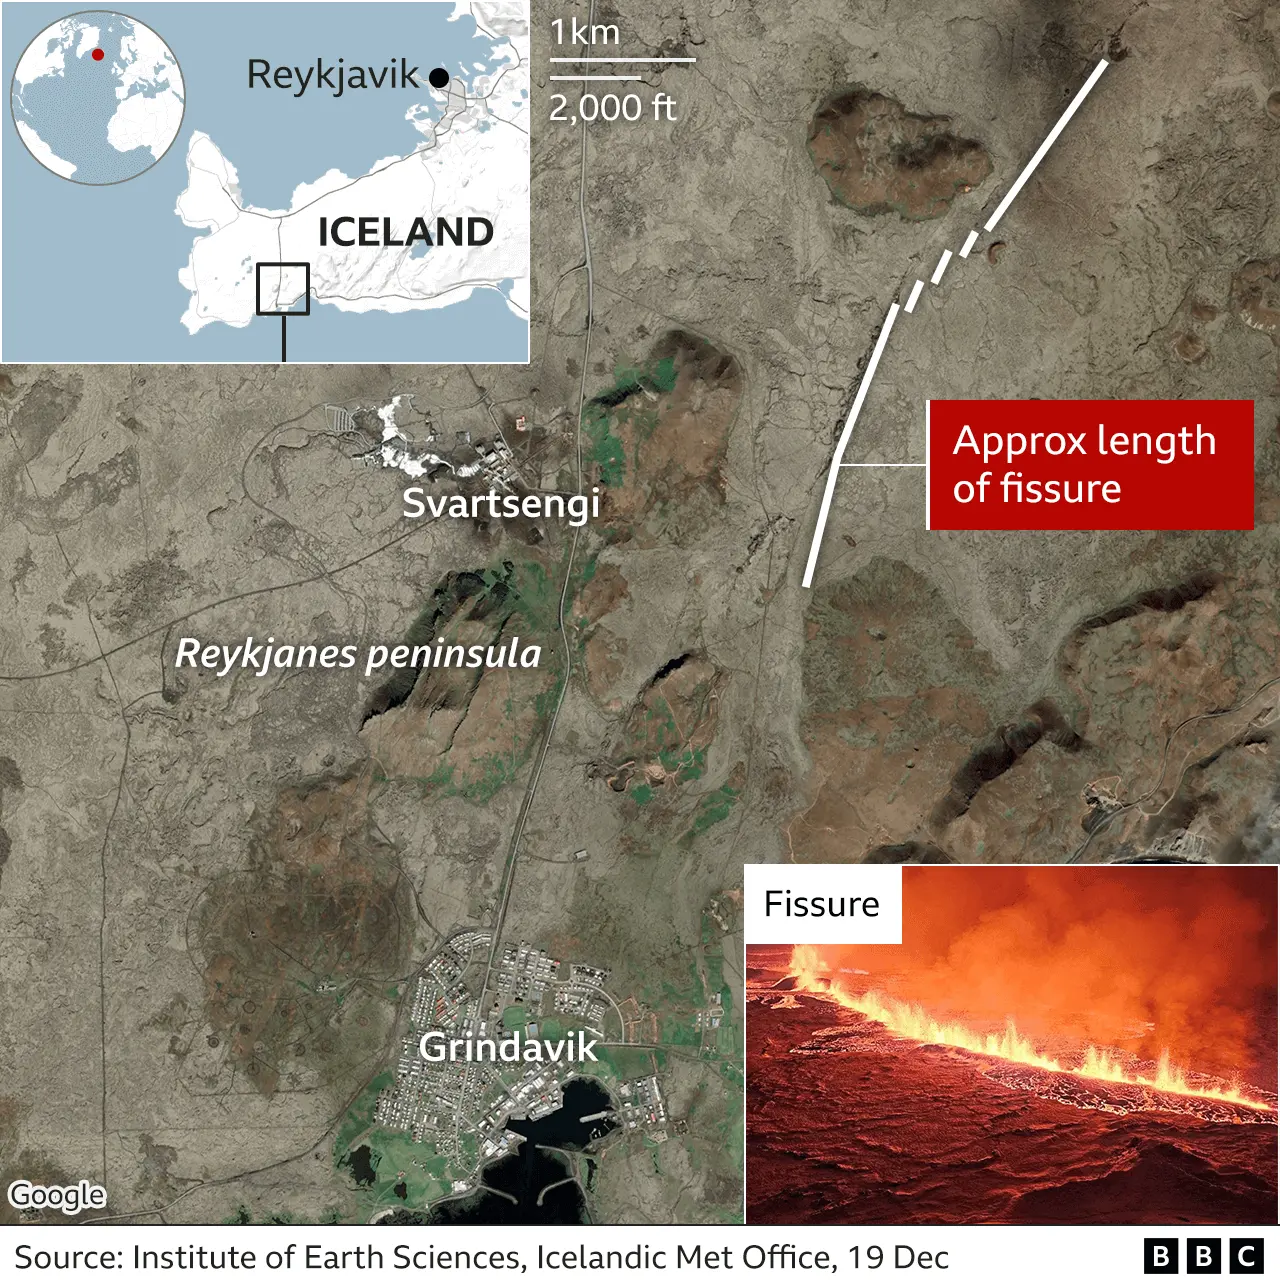 A detailed map of the 3.5km fissure - revealing its length, and how close it is to Grindavik